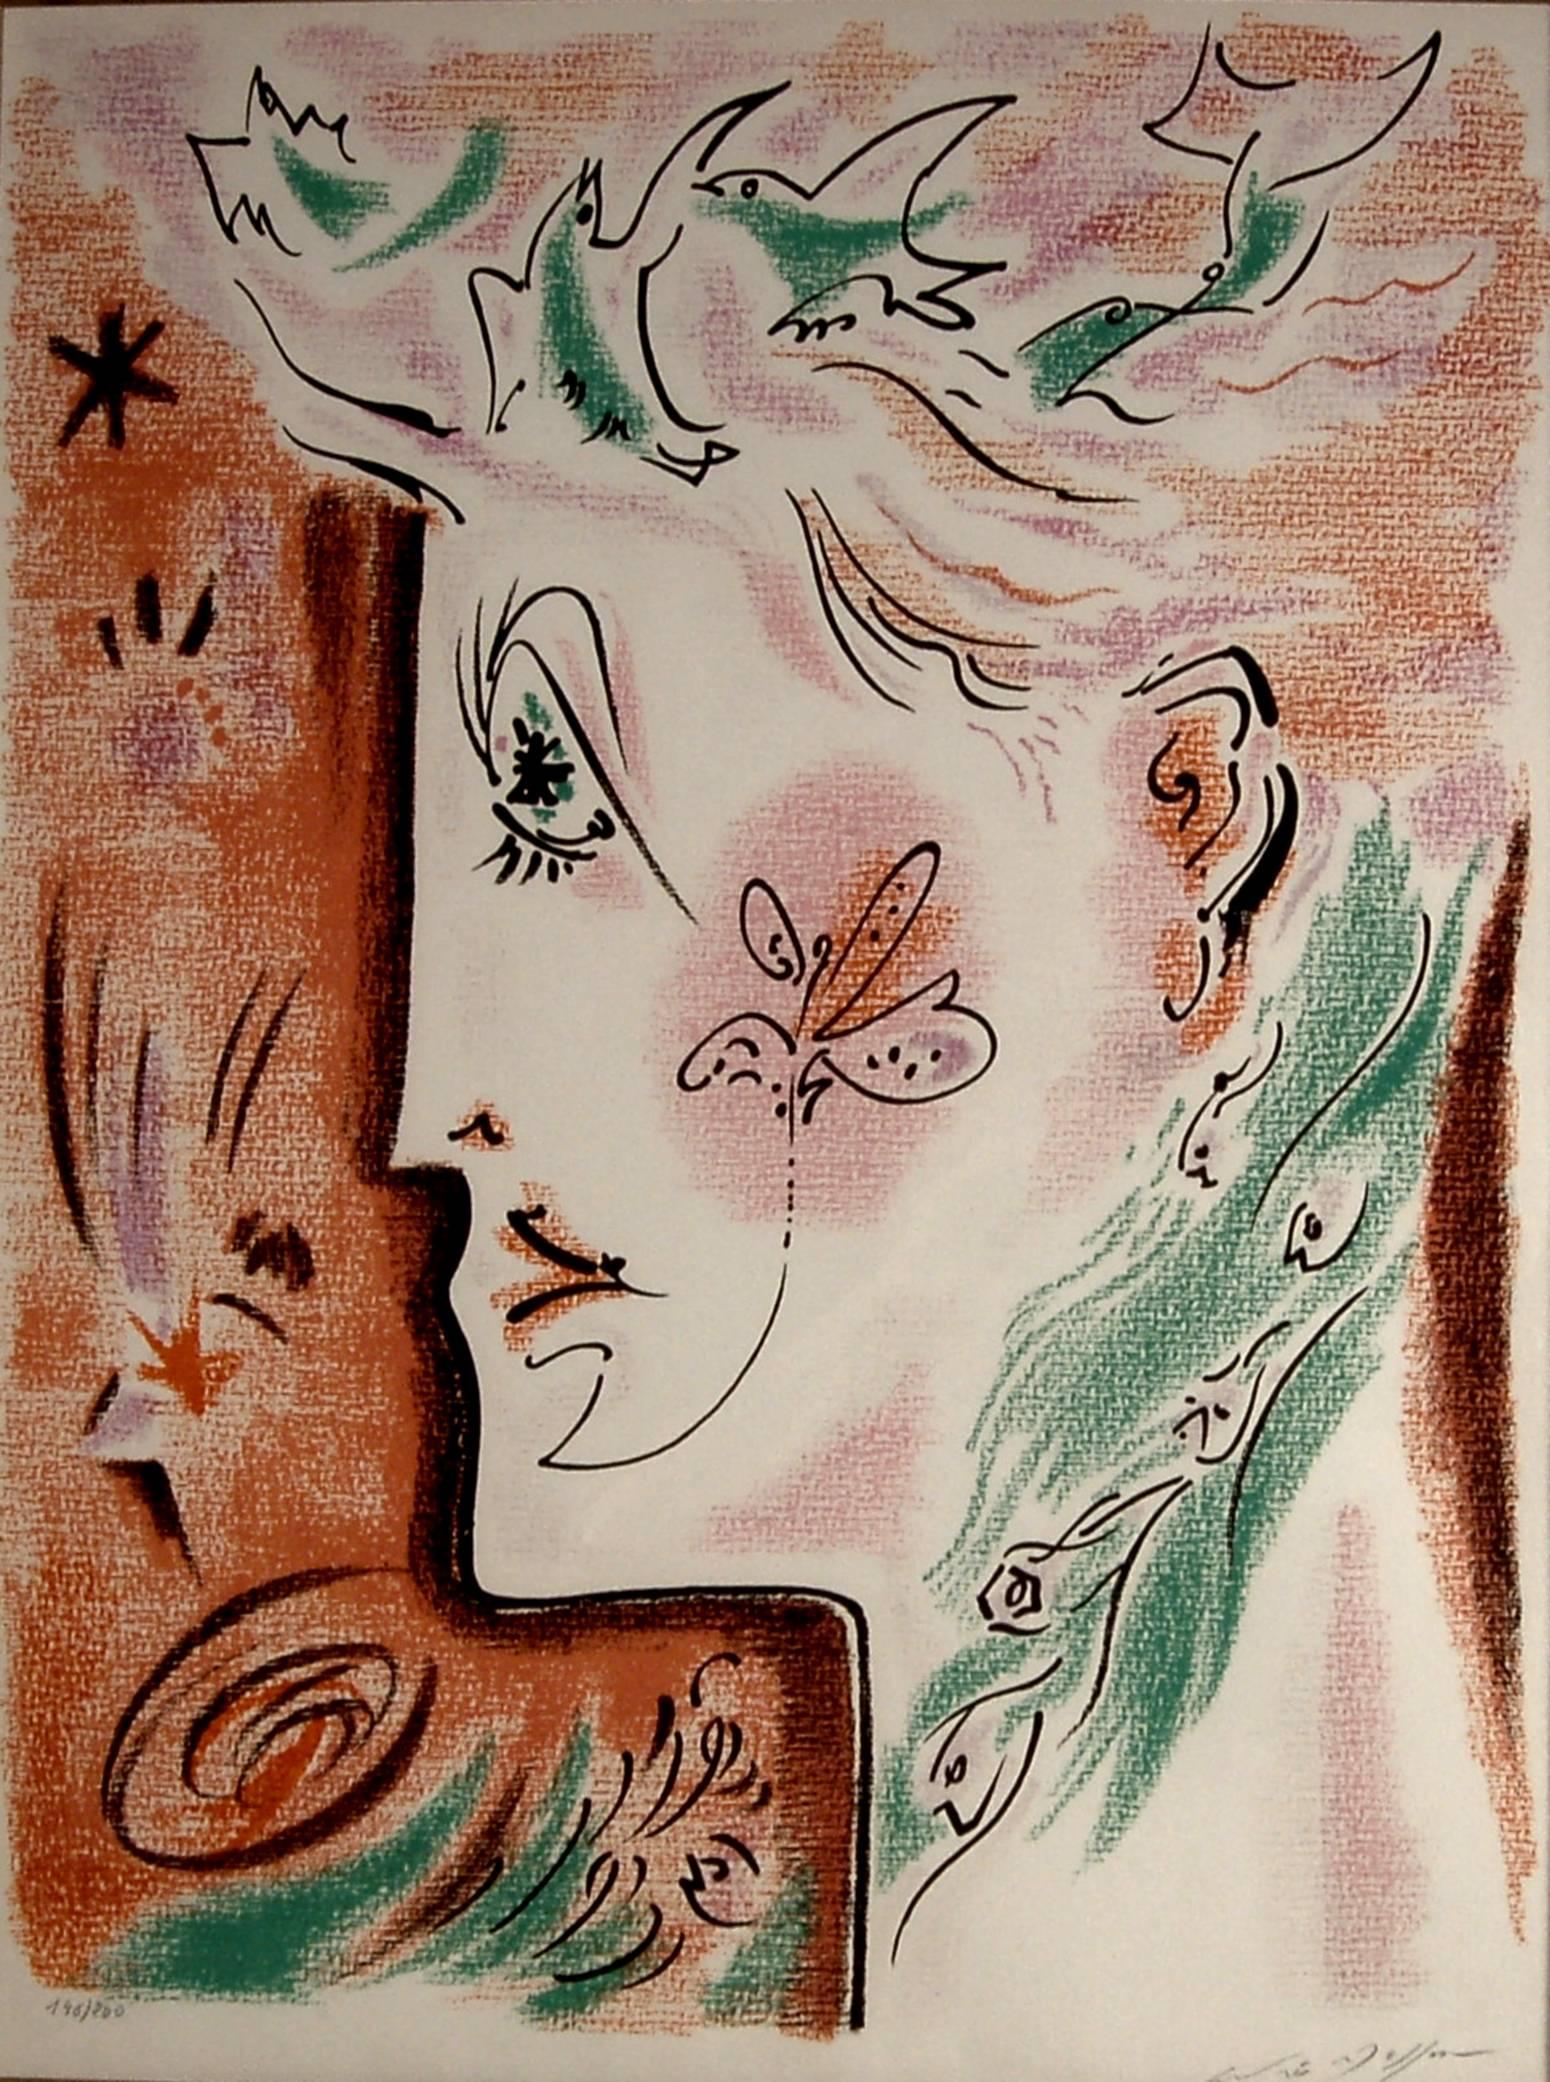 Surrealist Woman - Print by André Masson